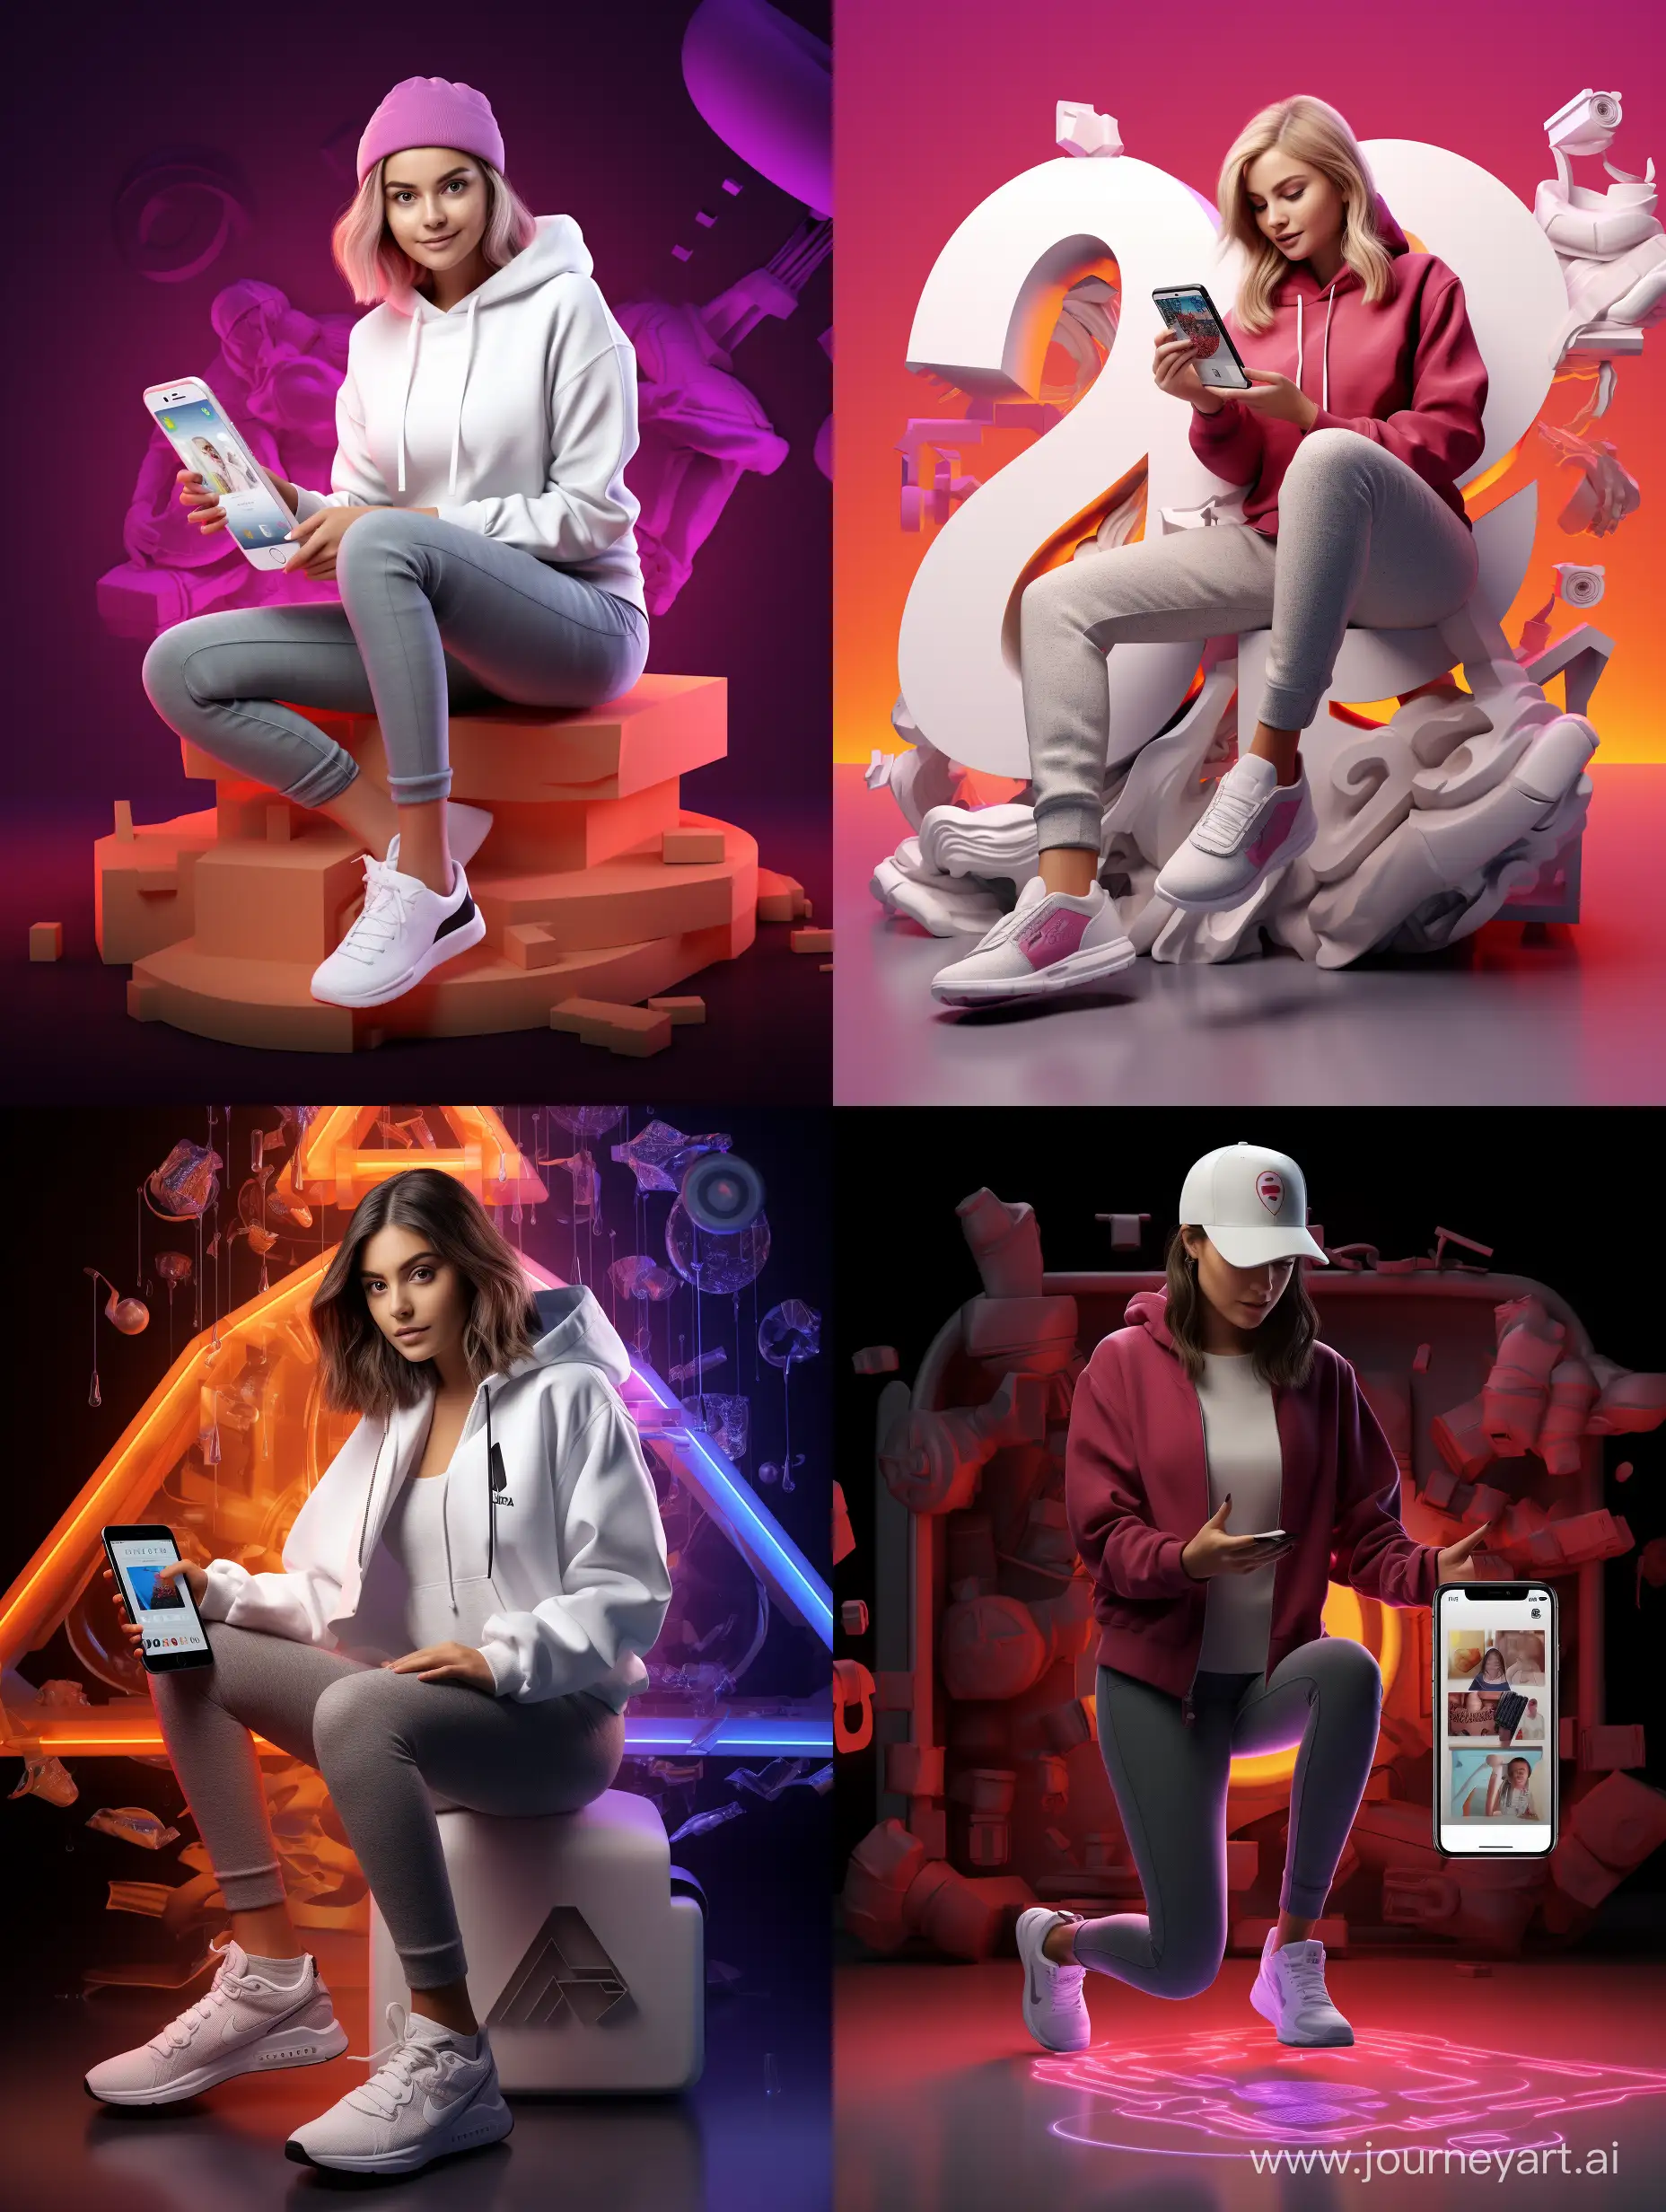 Create a 3D image featuring a realistic young 45 year old girl working on a 3D "Instagram" aw logo. The character must have a l shoe, hoodie, sneakers, the background image must display a social media profile page and the username maede and a matching profile picture and modify it.